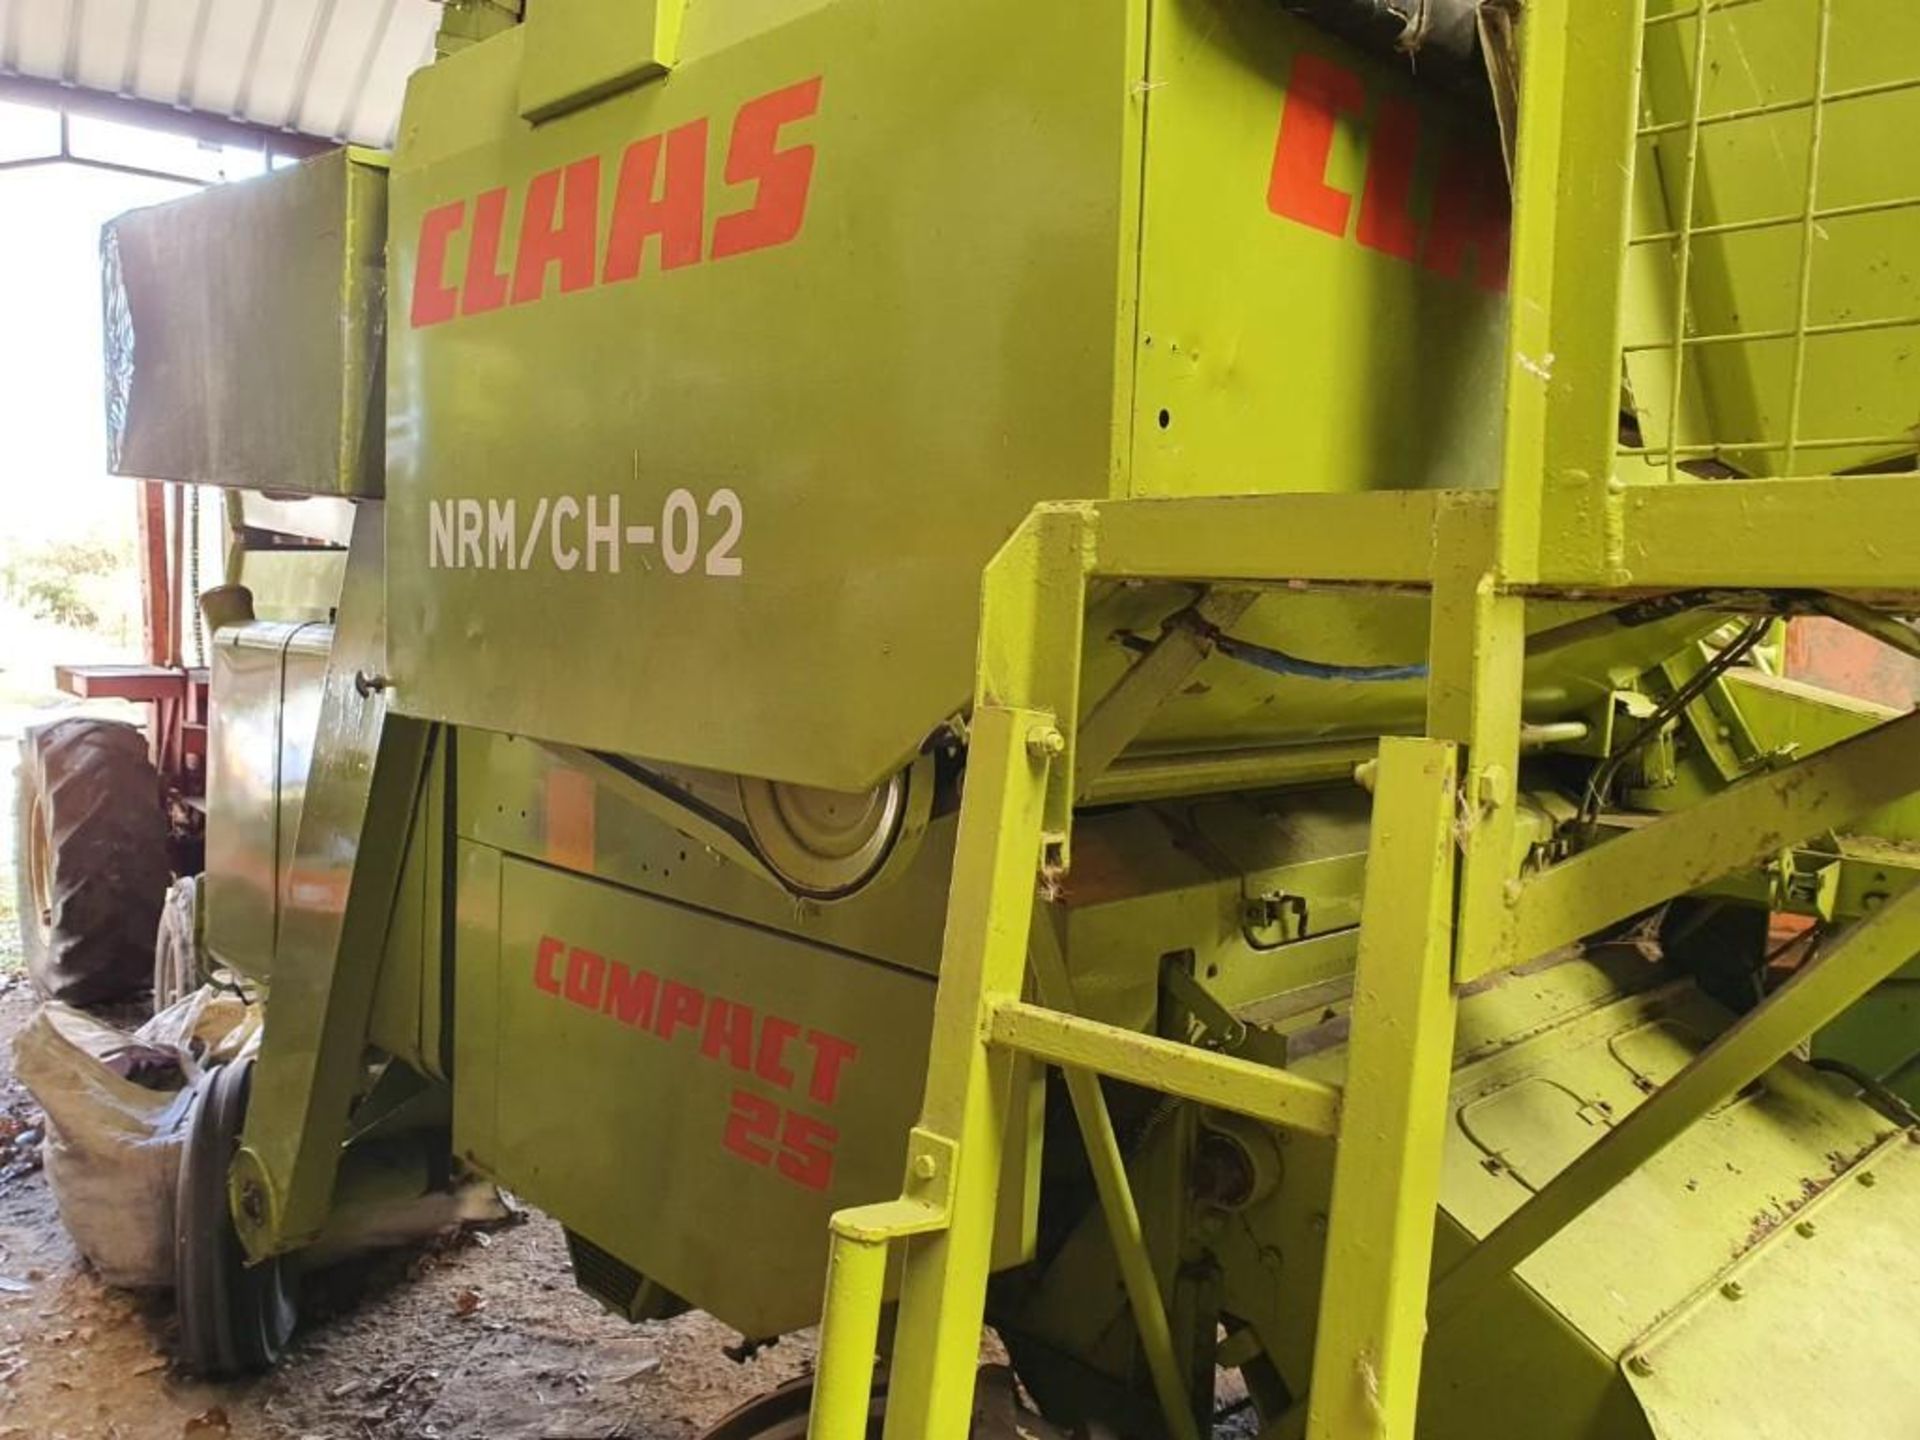 Claas Compact 25 Combine - Image 3 of 12